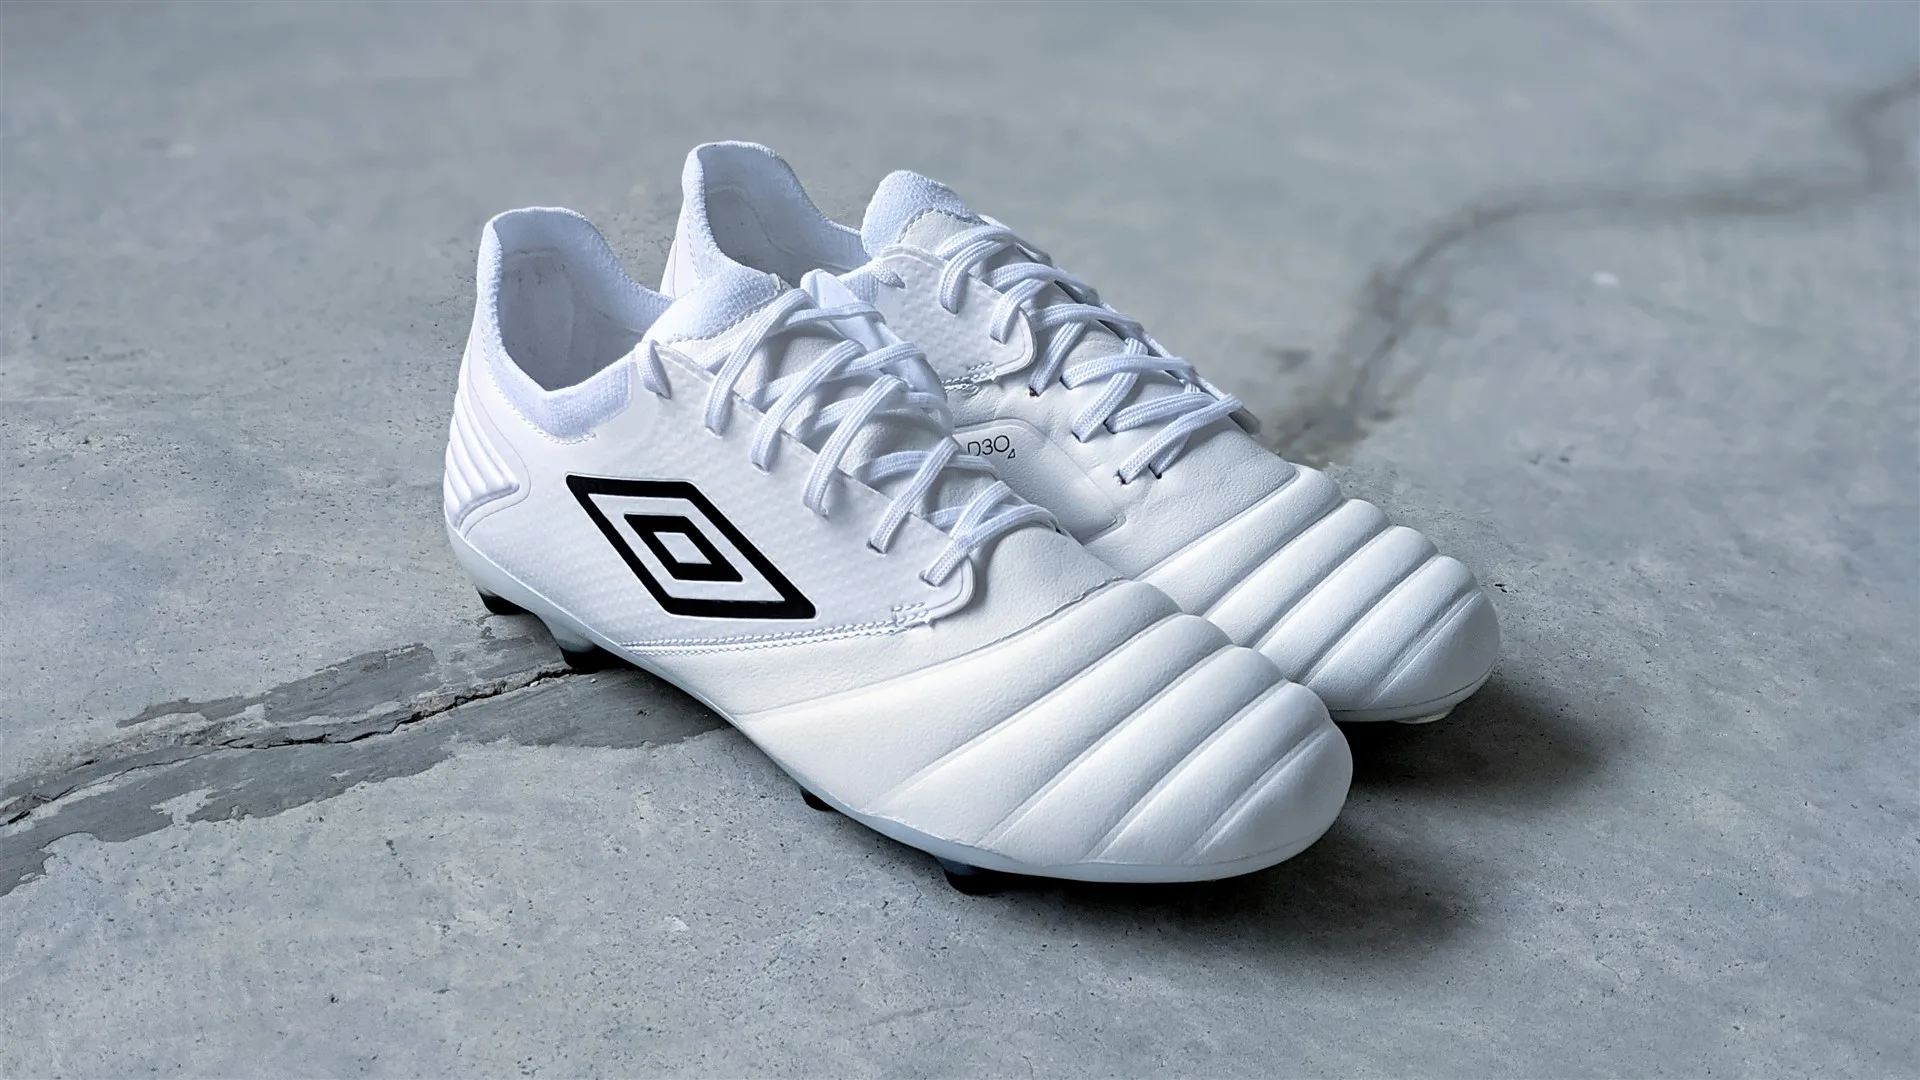 Umbro Tocco Pro football boots soccer cleats review